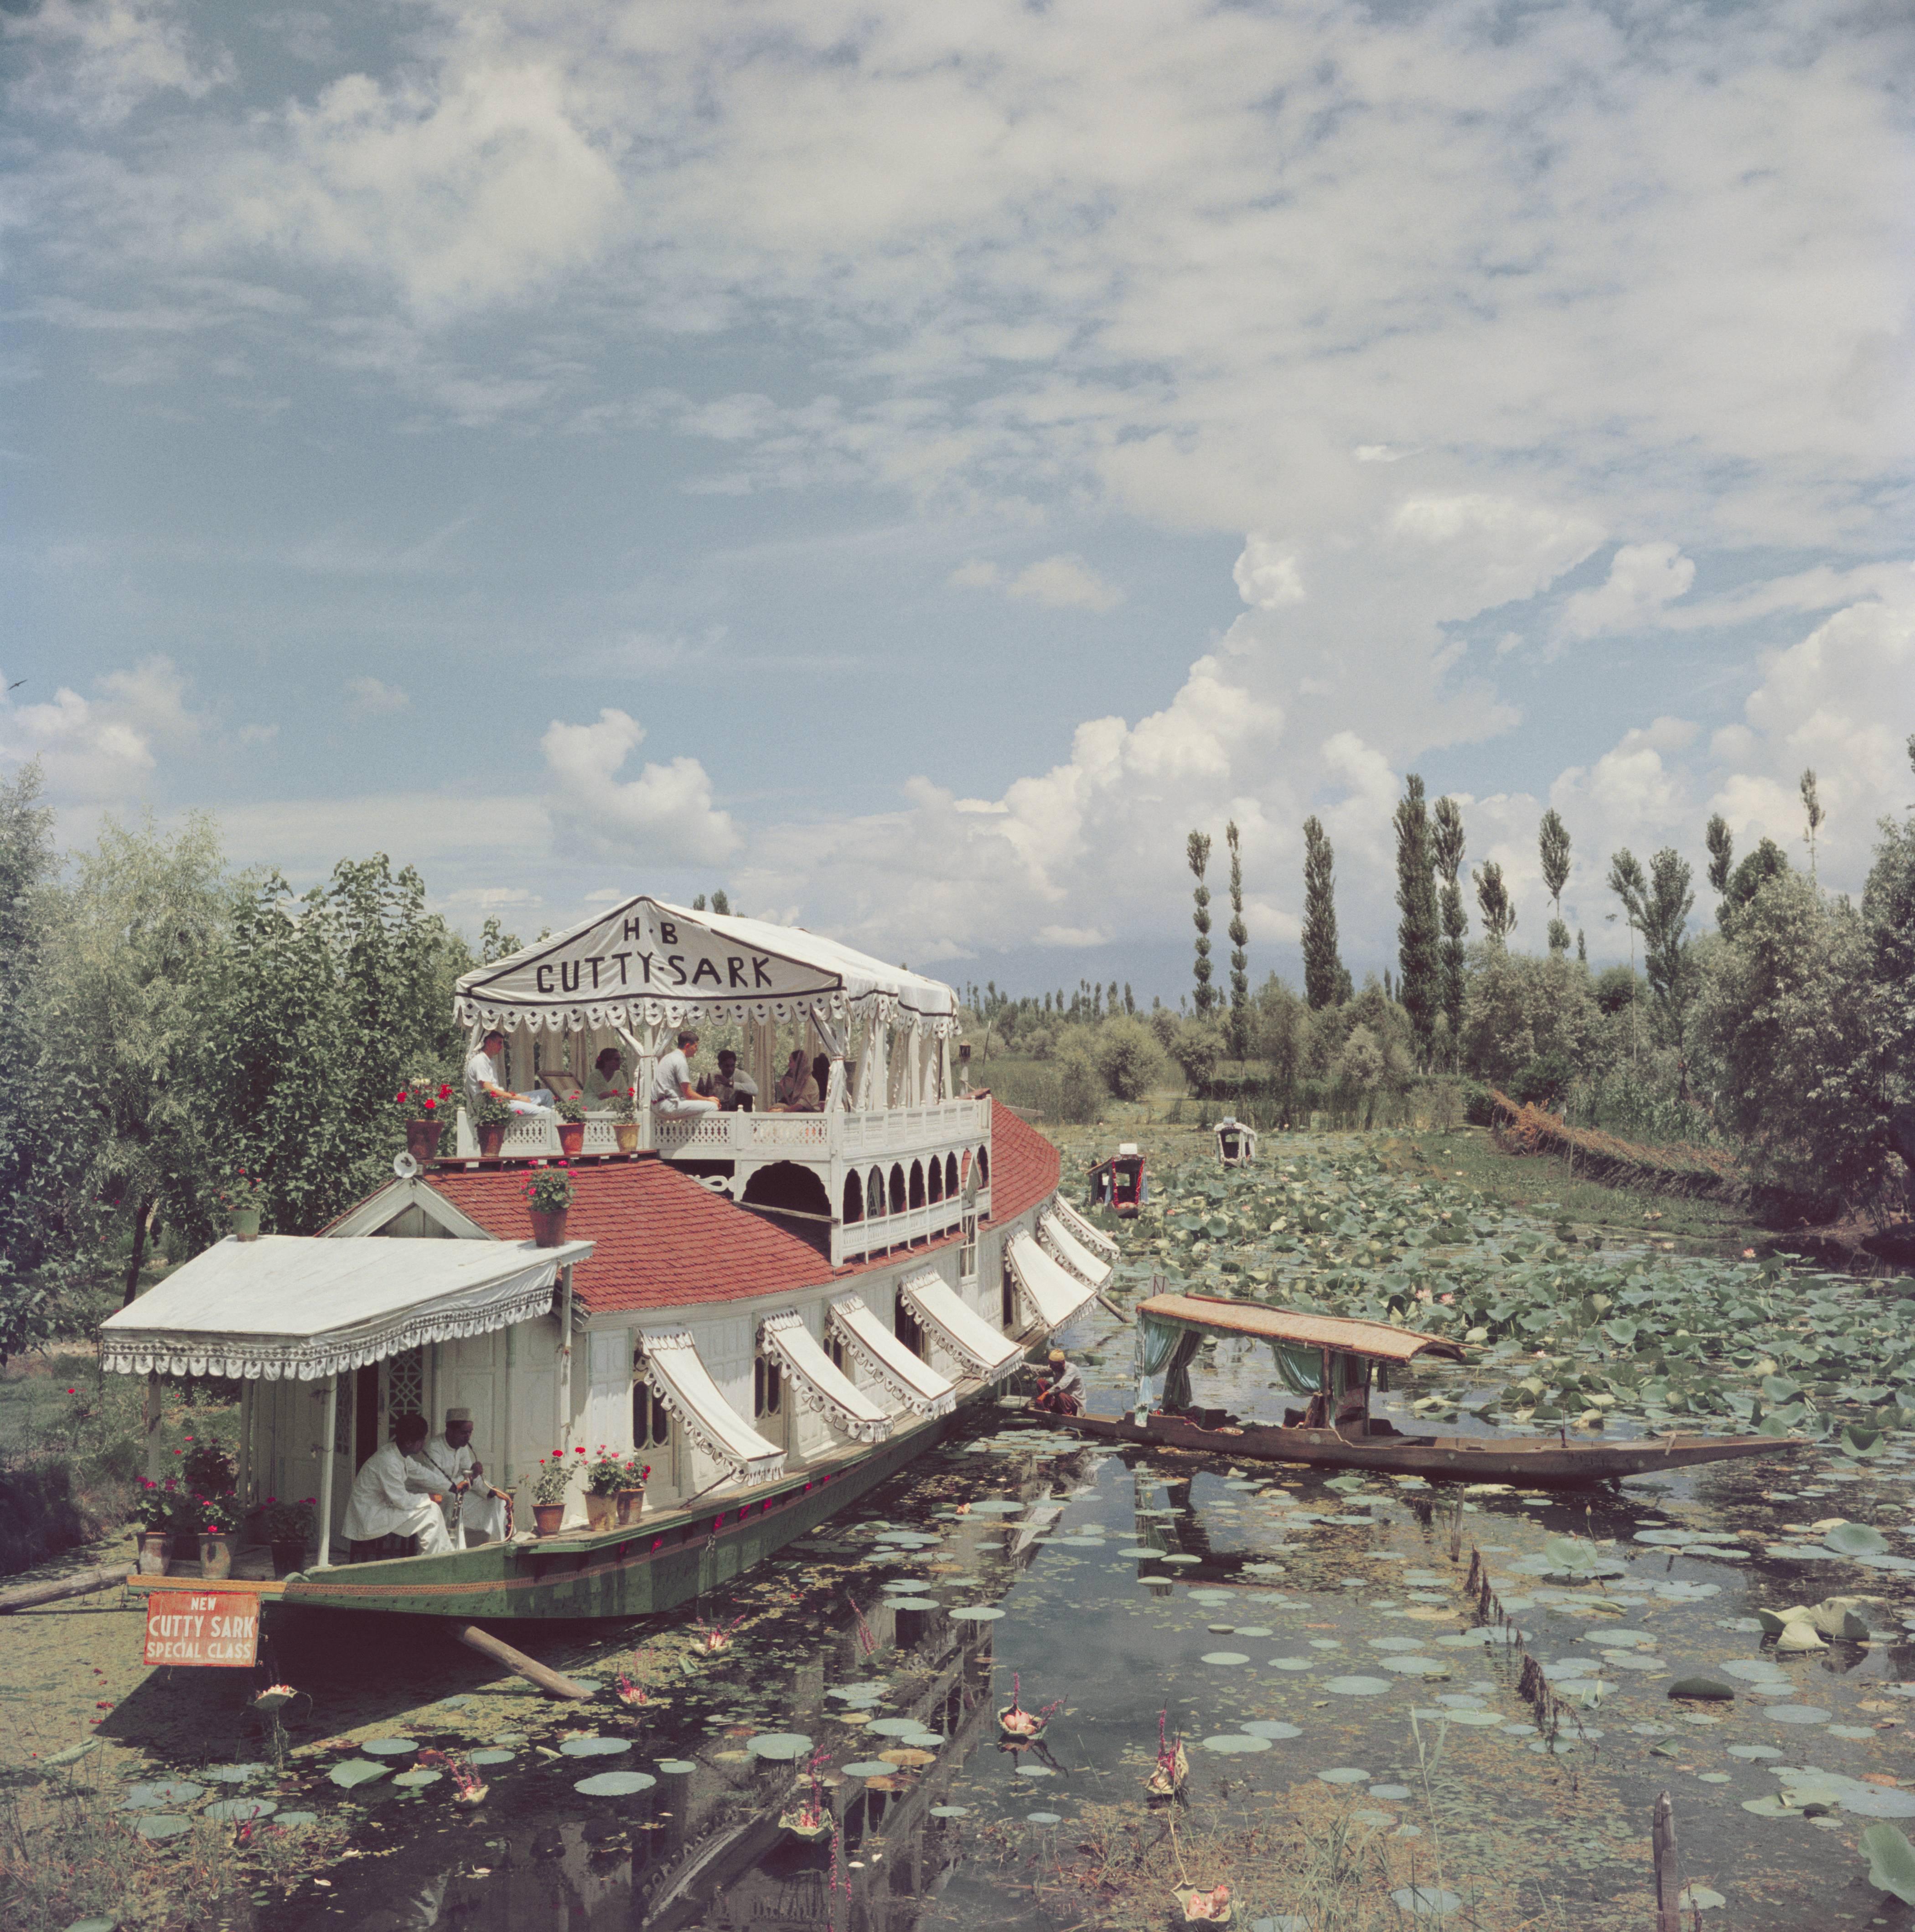 A luxury boat trip on the Jhelum River near Srinagar, in Jammu and Kashmir, India, 1961. The boat is called the 'HB Cutty Sark'. (Photo by Slim Aarons/Getty Images)

C-type print from the original transparency held at the Getty Images Archive,